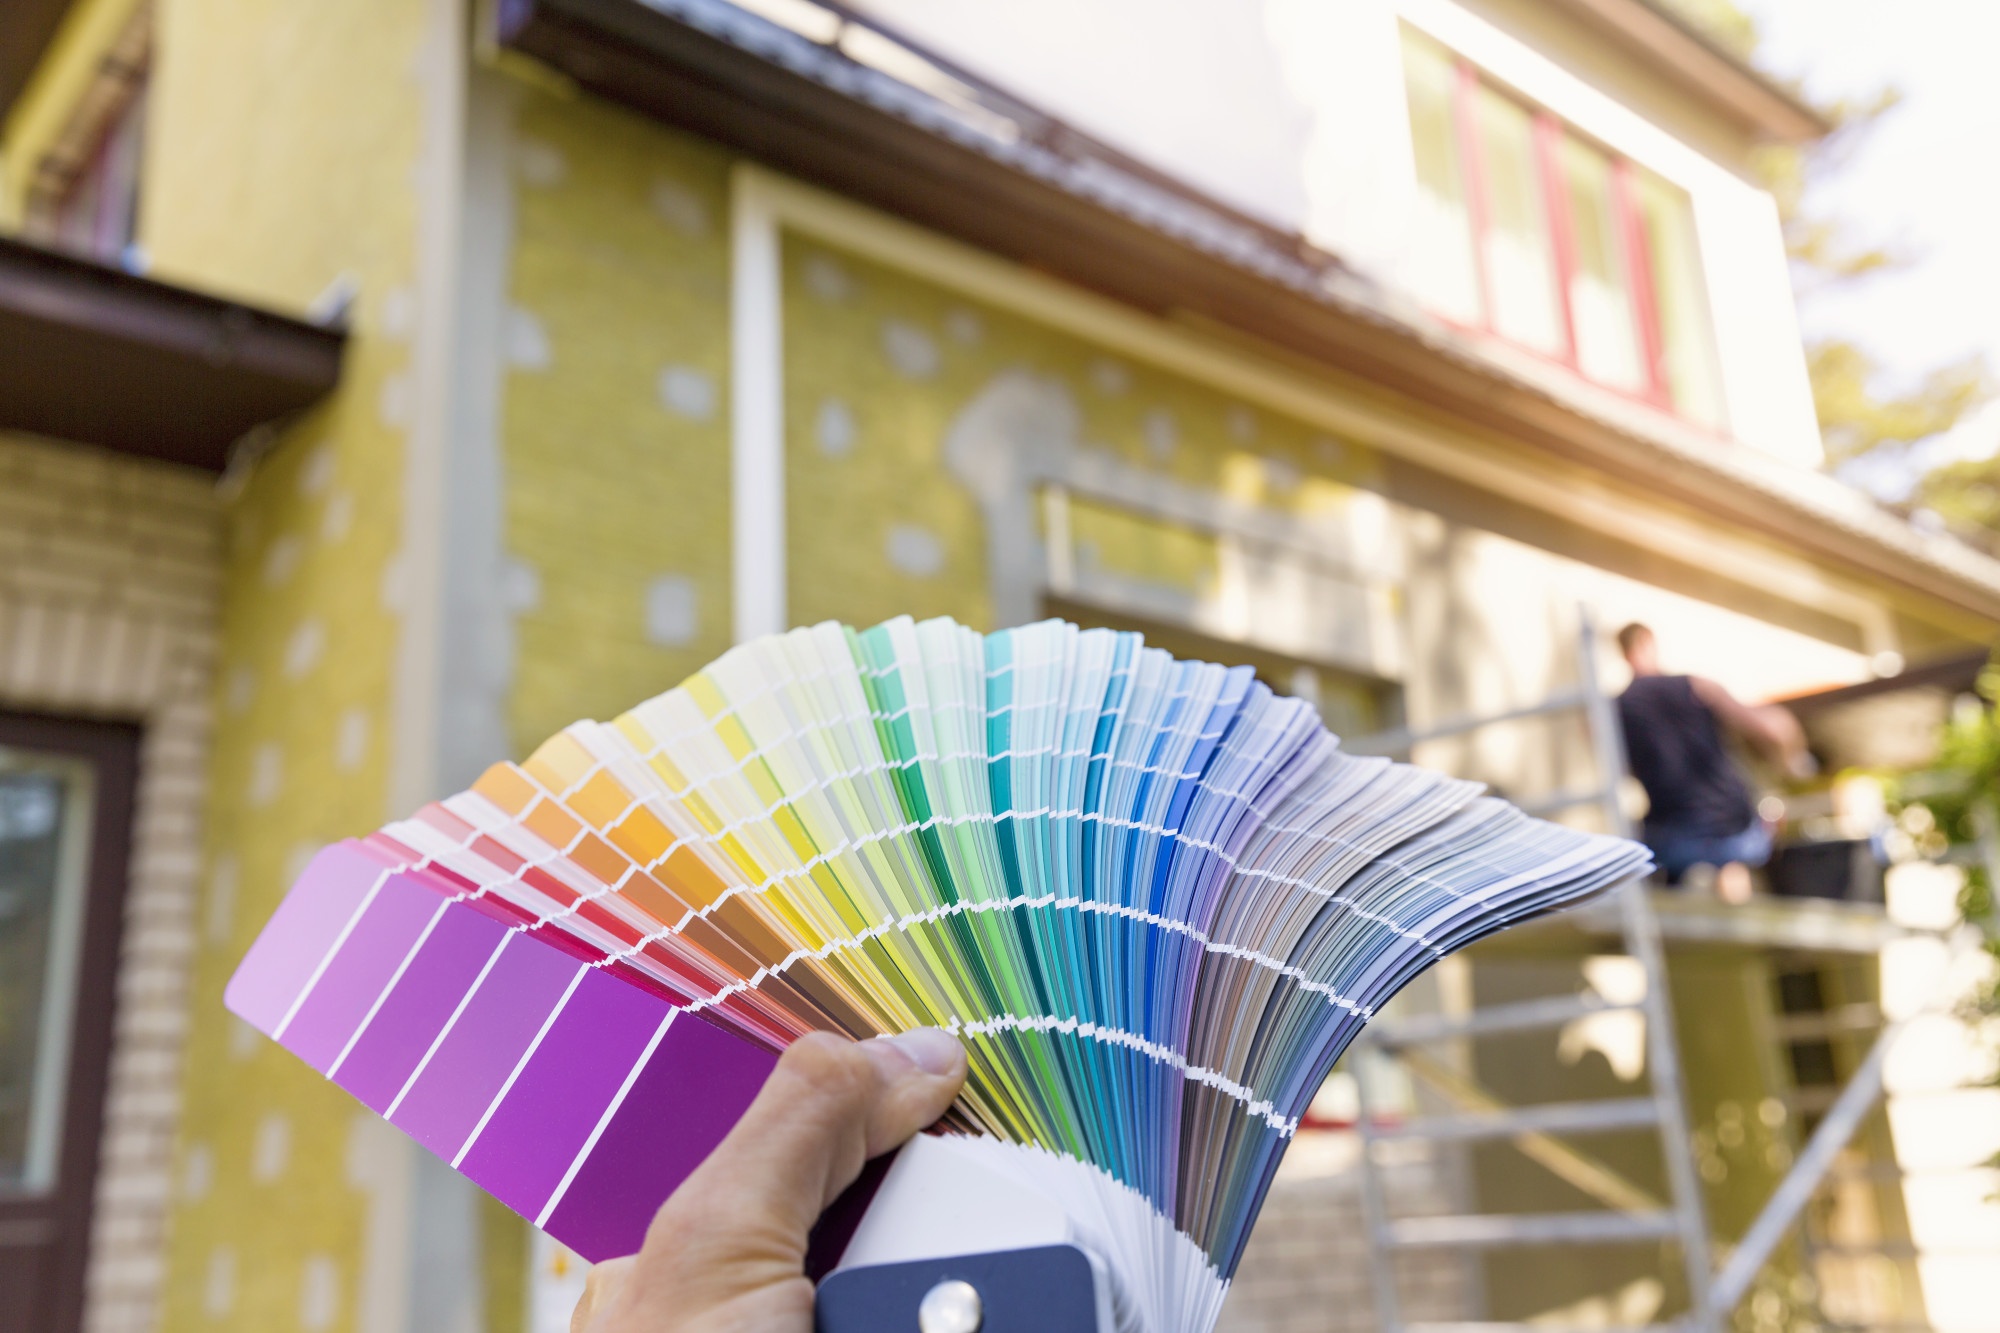 Outstanding Exterior Paint Colors to Give Your Home a Face Lift